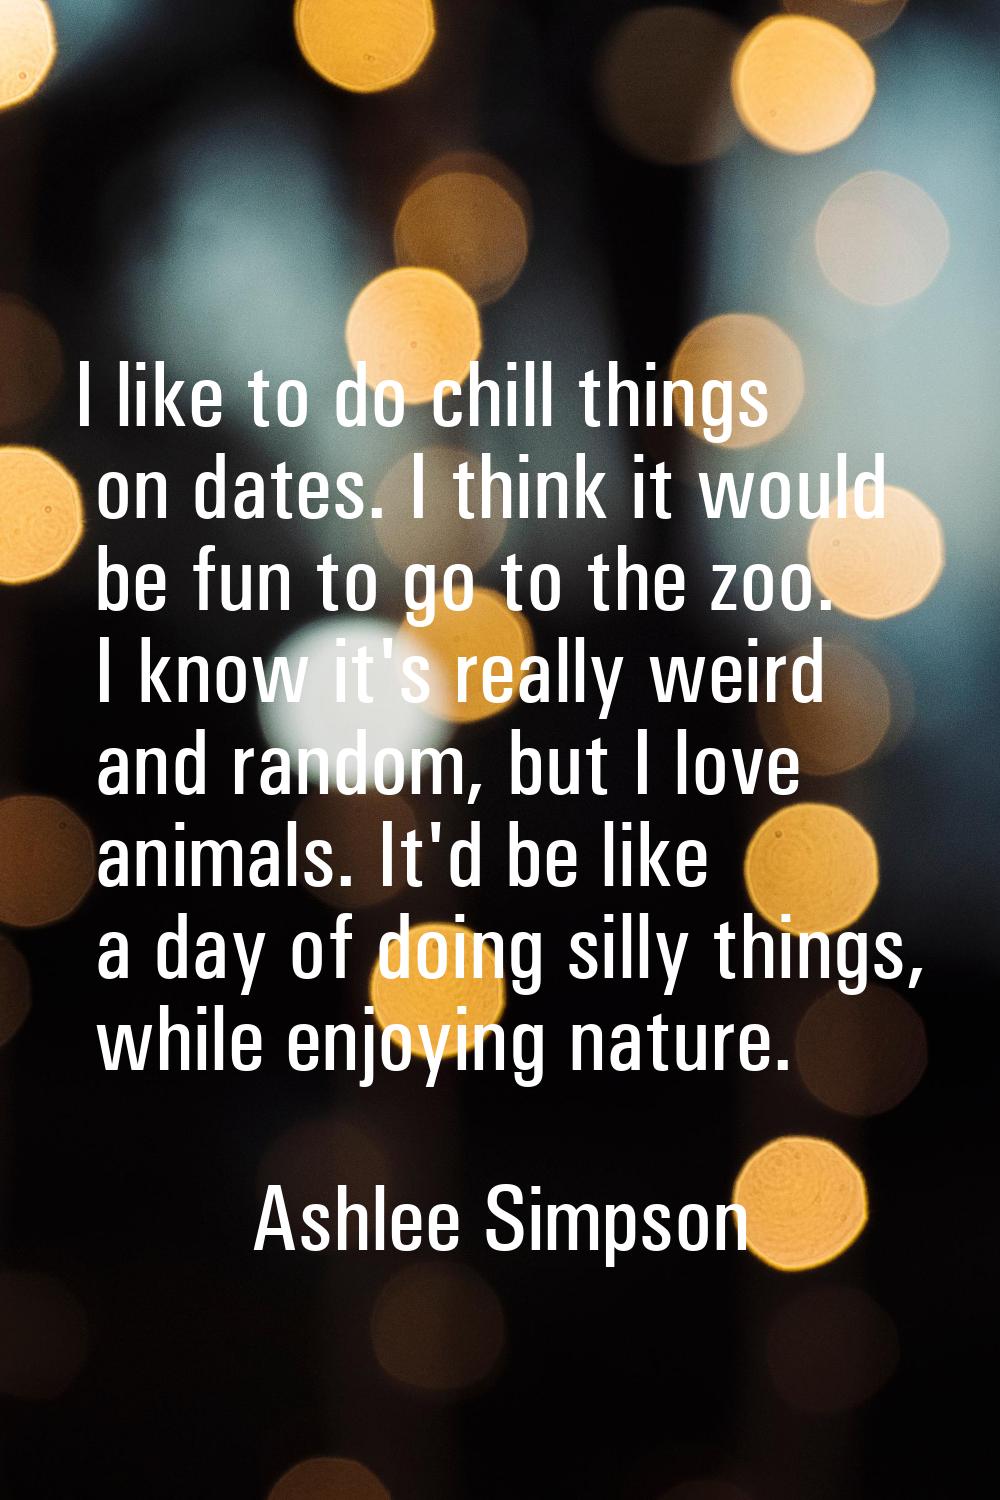 I like to do chill things on dates. I think it would be fun to go to the zoo. I know it's really we